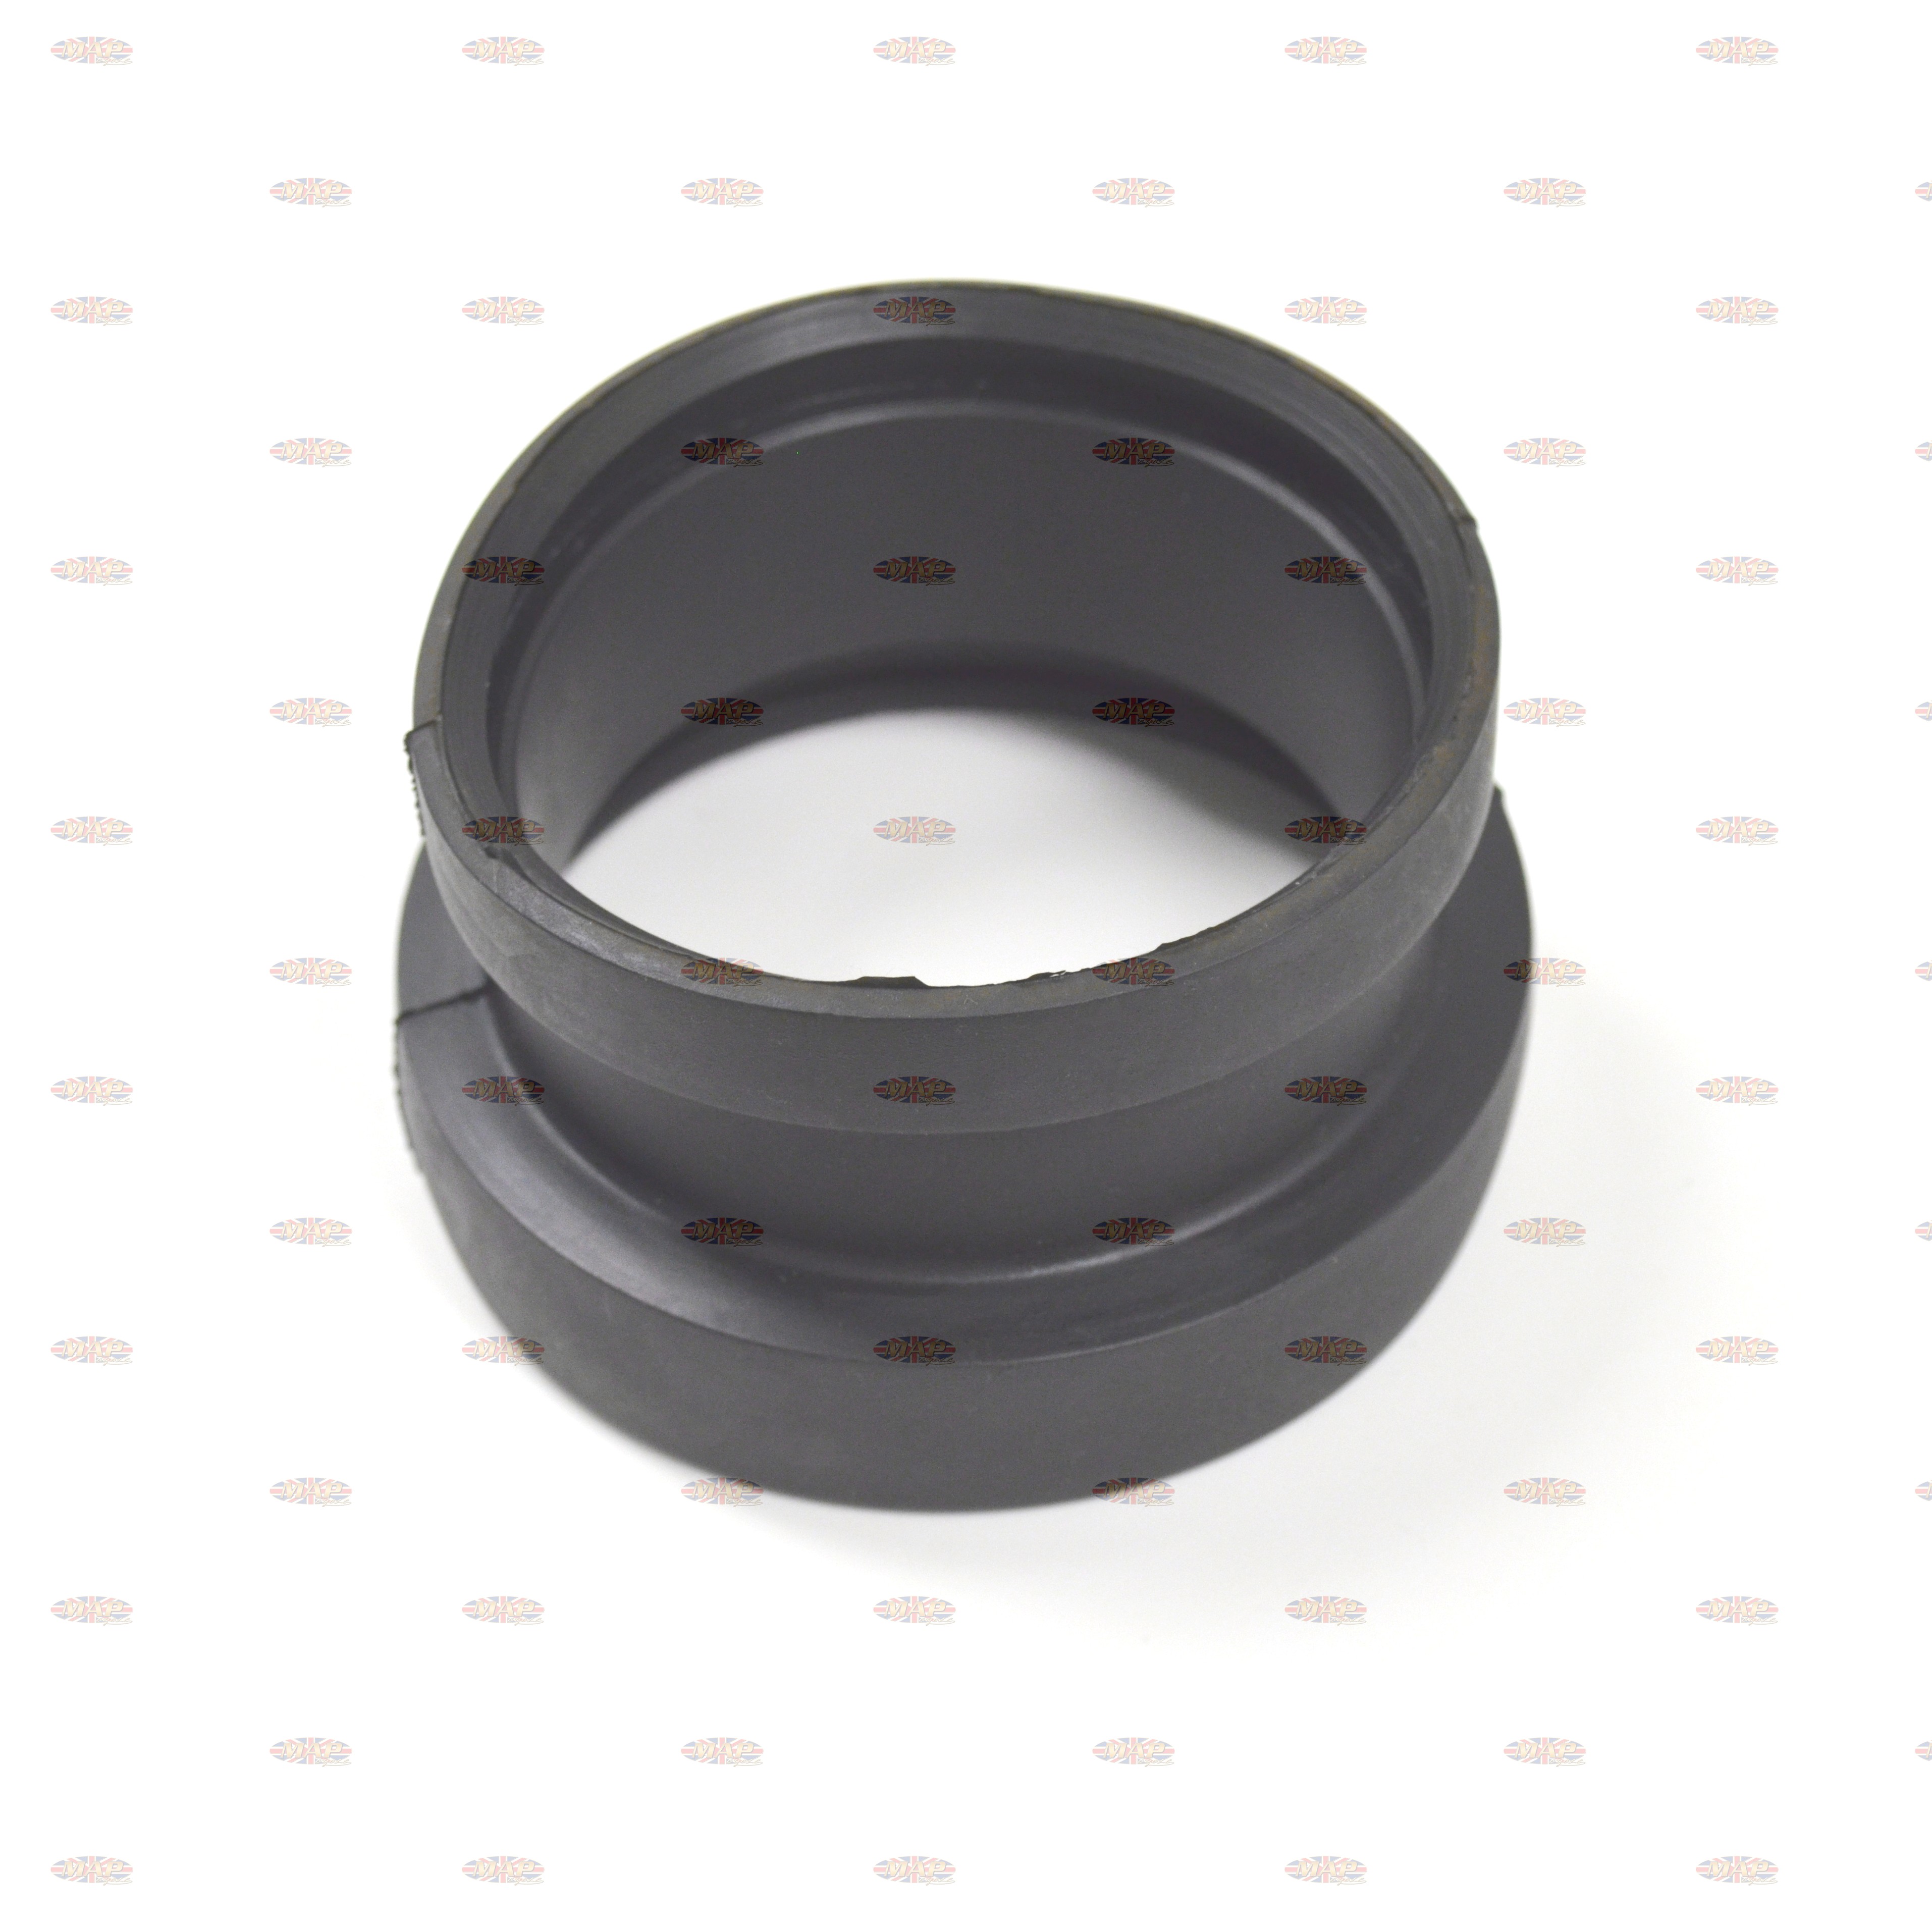 Triumph T140 T160 TR7 Speedometer and Tachometer Rubber Mounting Cup 97-4573